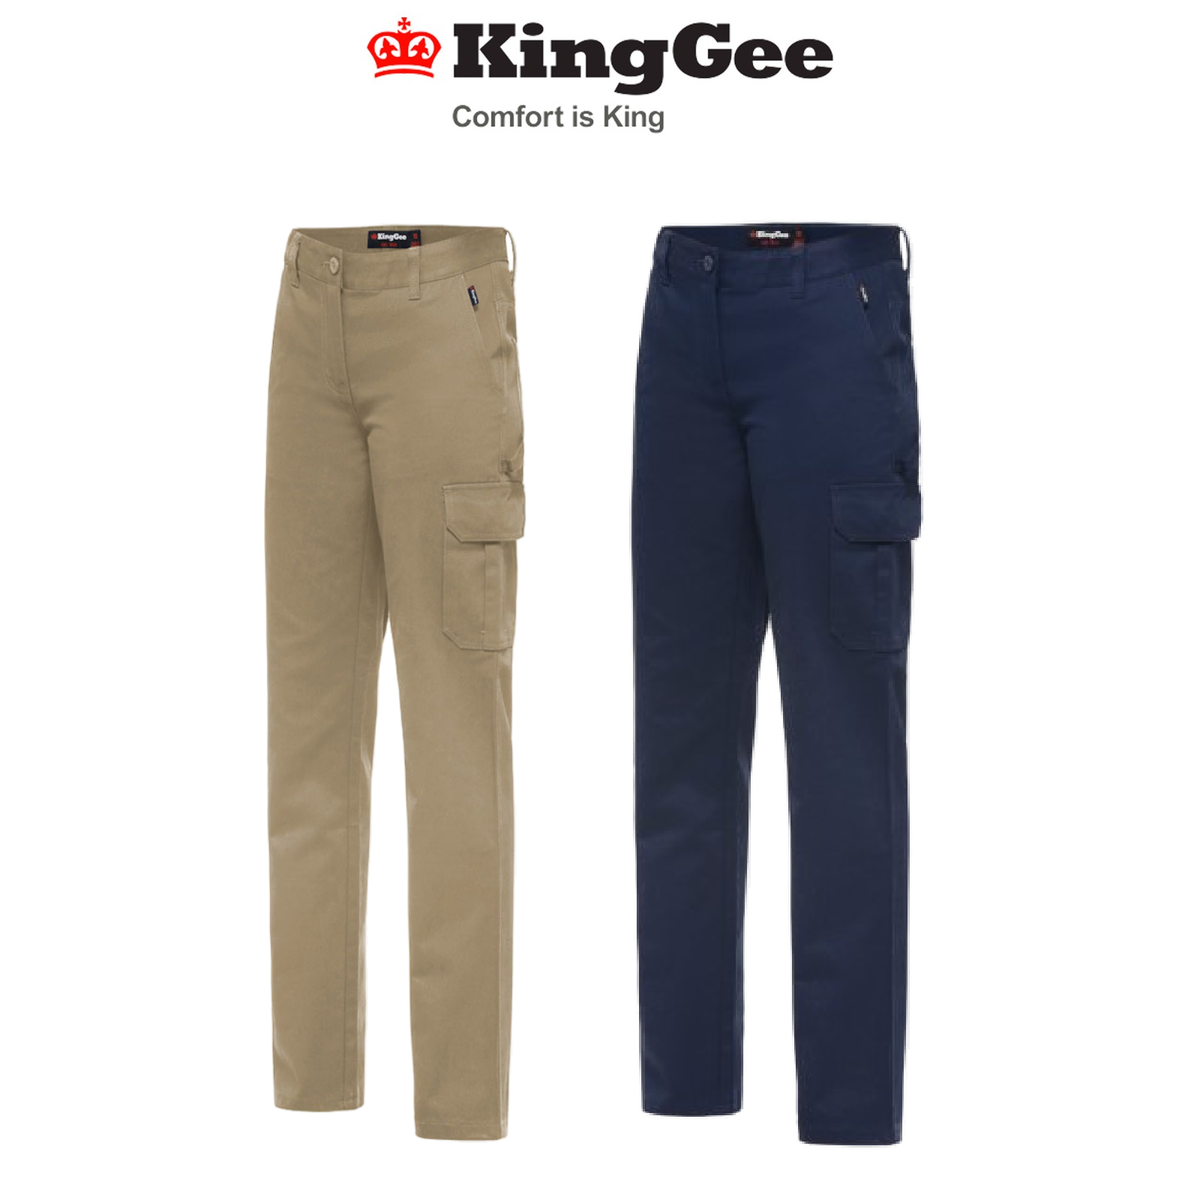 KingGee Women's Work Pants Improved Fit Comfy Cotton Drill Work Safety K43530